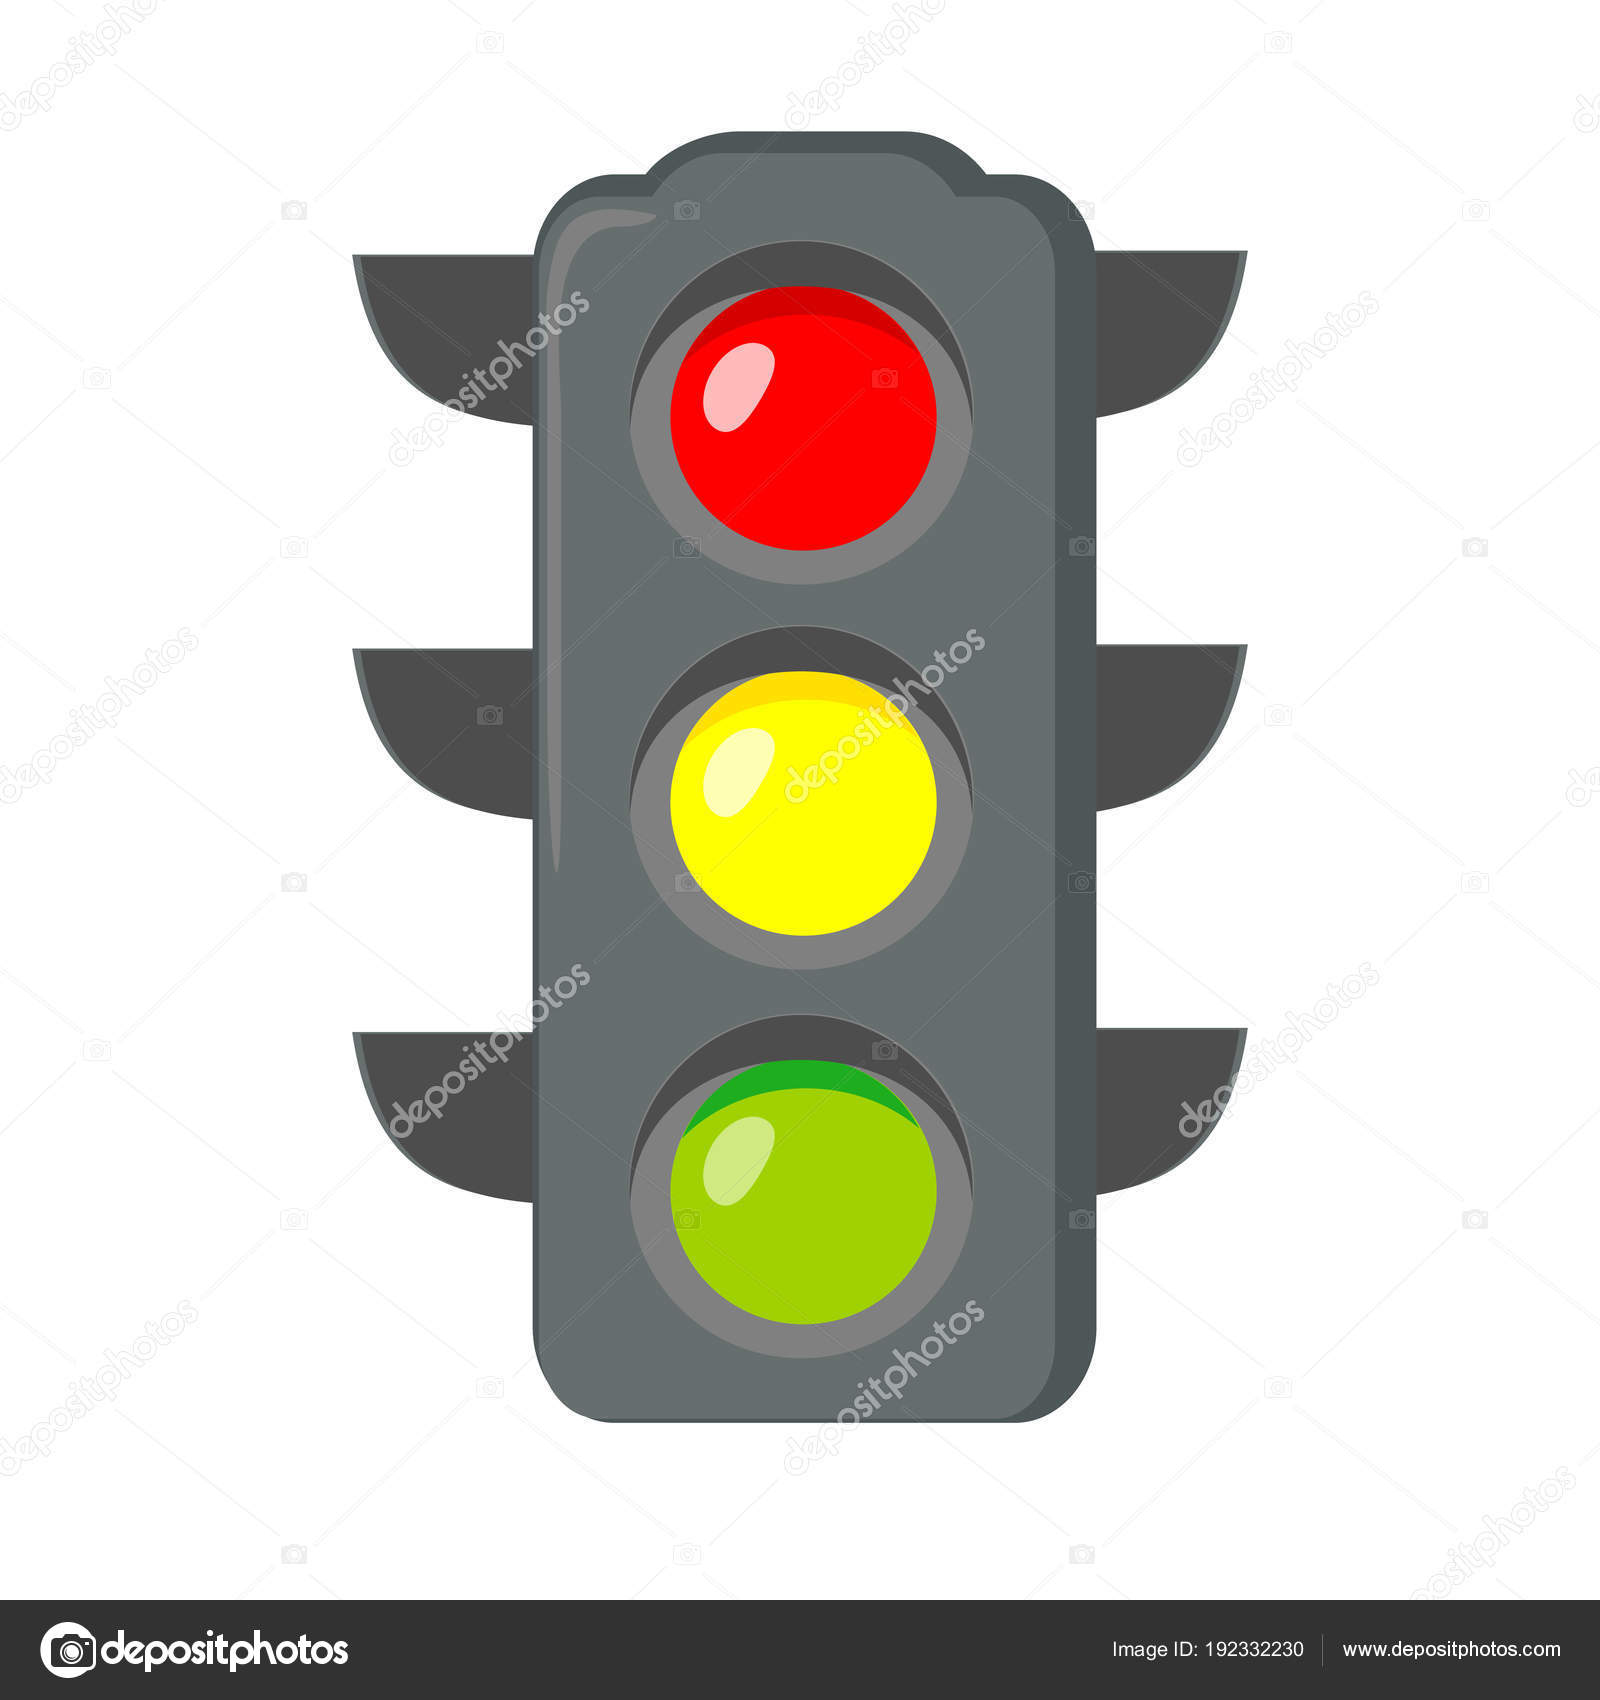 Icon cartoon traffic light. Signals with red light above yellow and ...